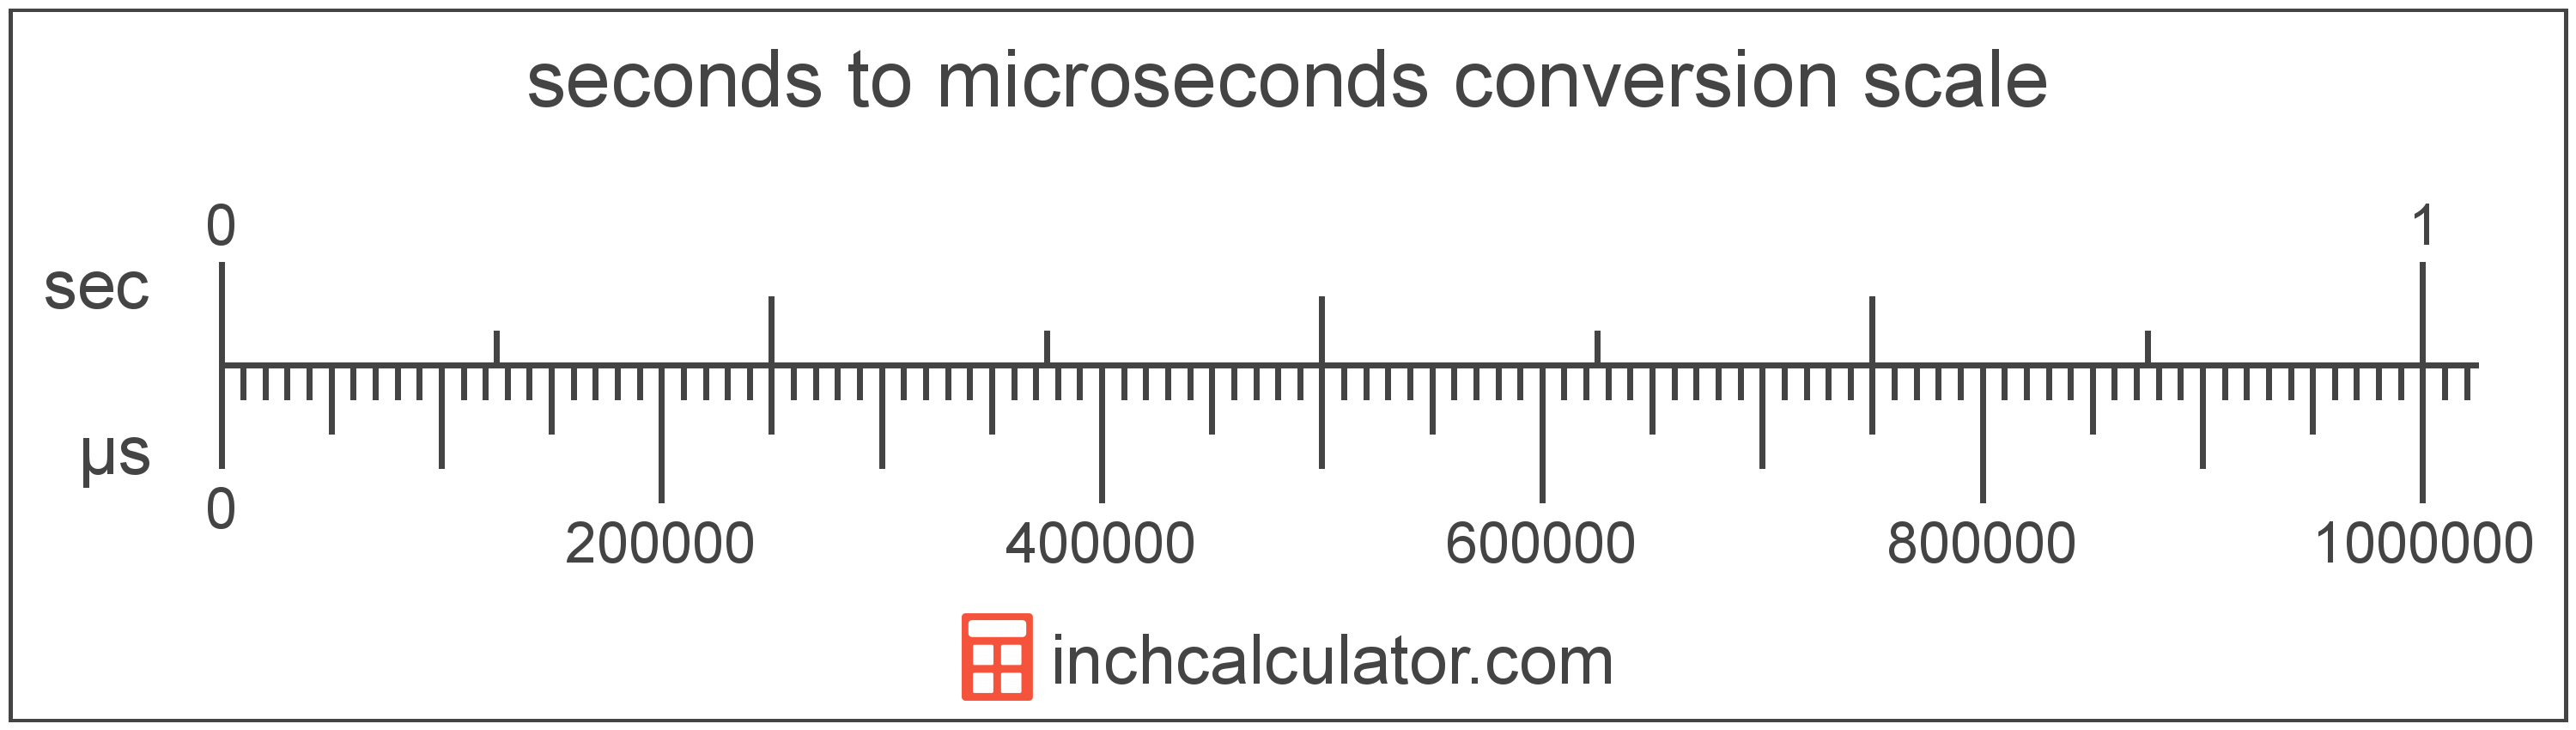 conversion scale showing seconds and equivalent microseconds time values